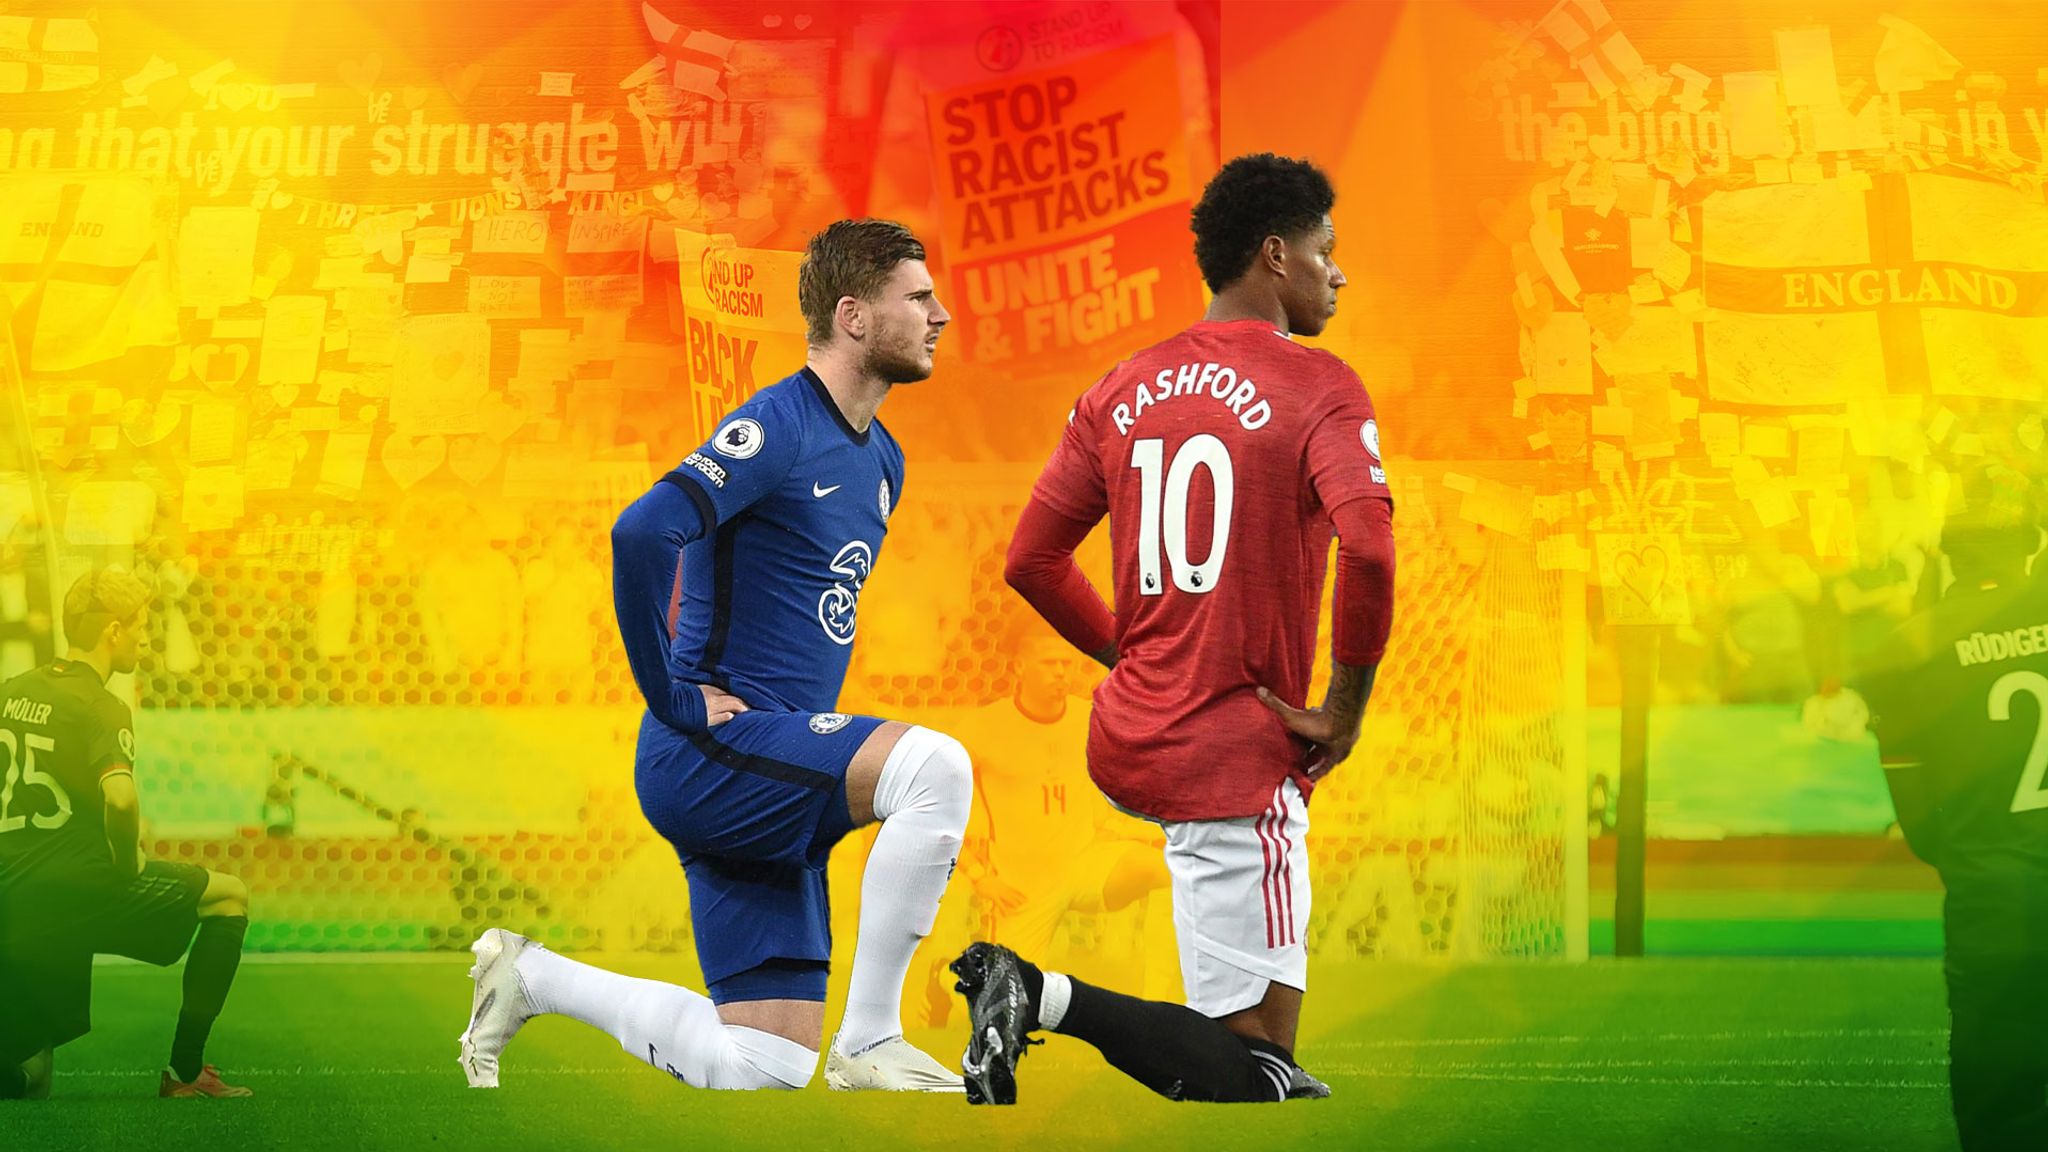 ITV Takes The Knee Against Racist Abuse Directed At England Football Players